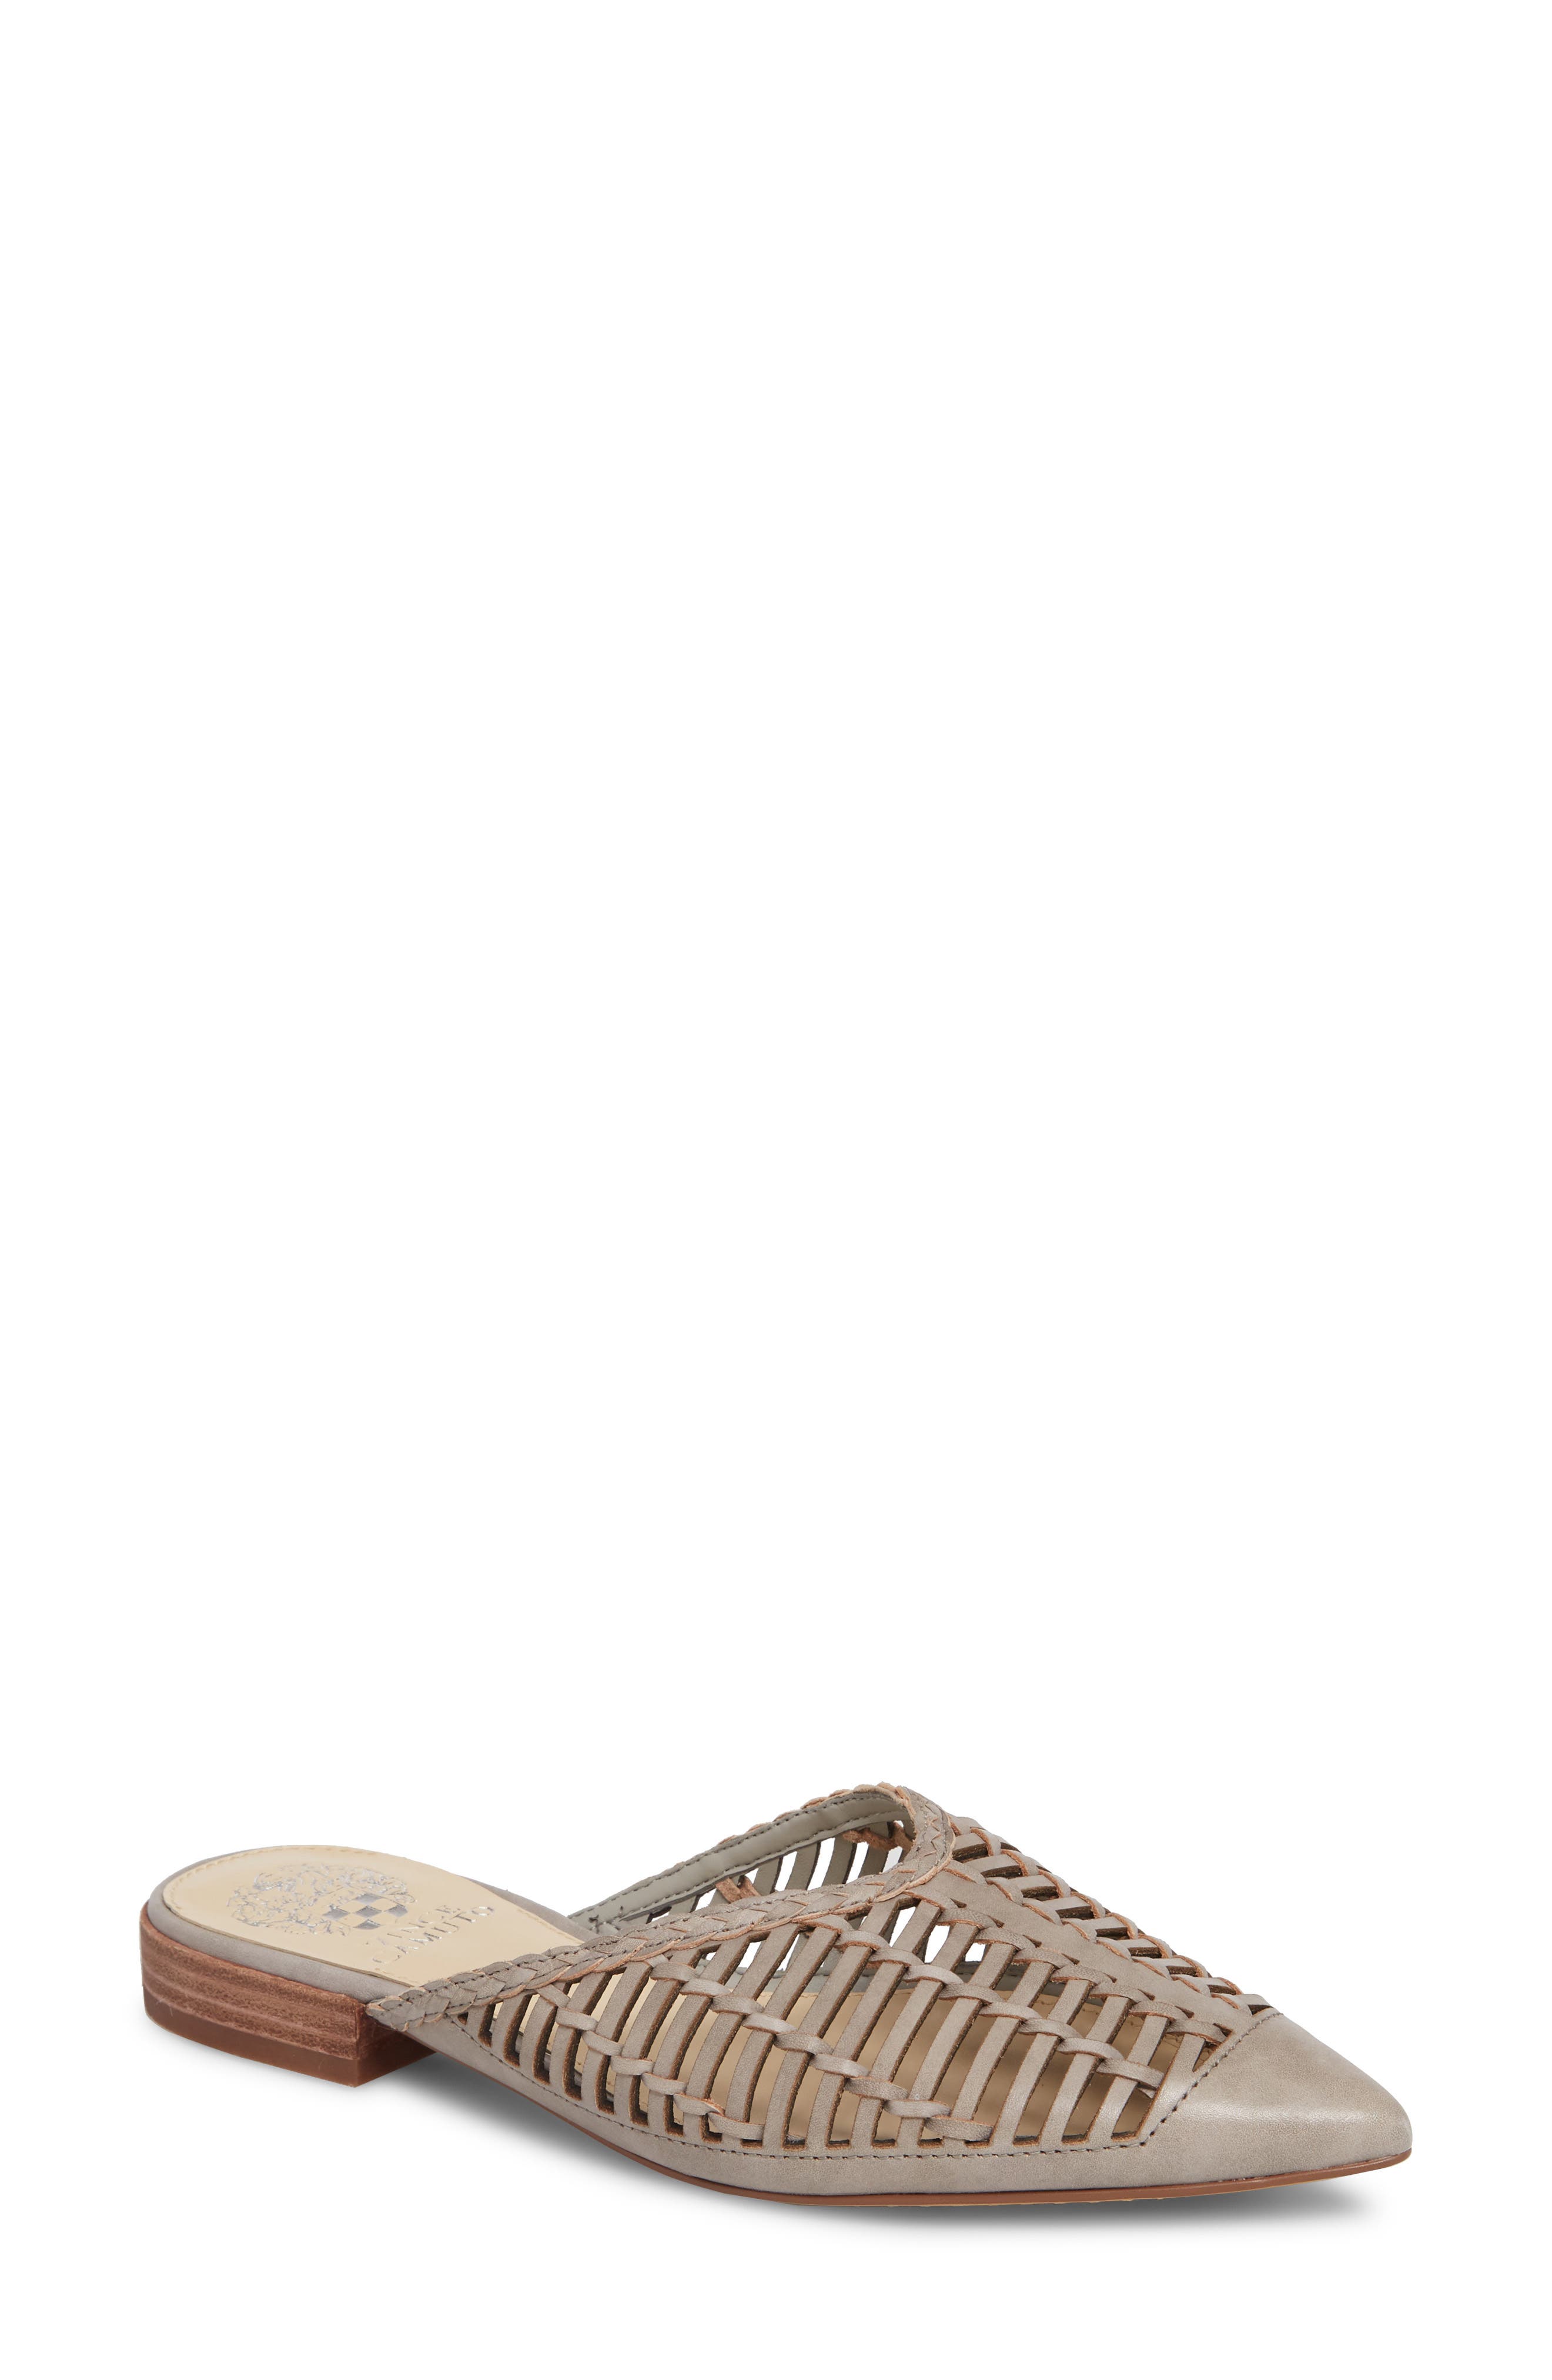 Vince Camuto Morley Woven Pointy Toe 